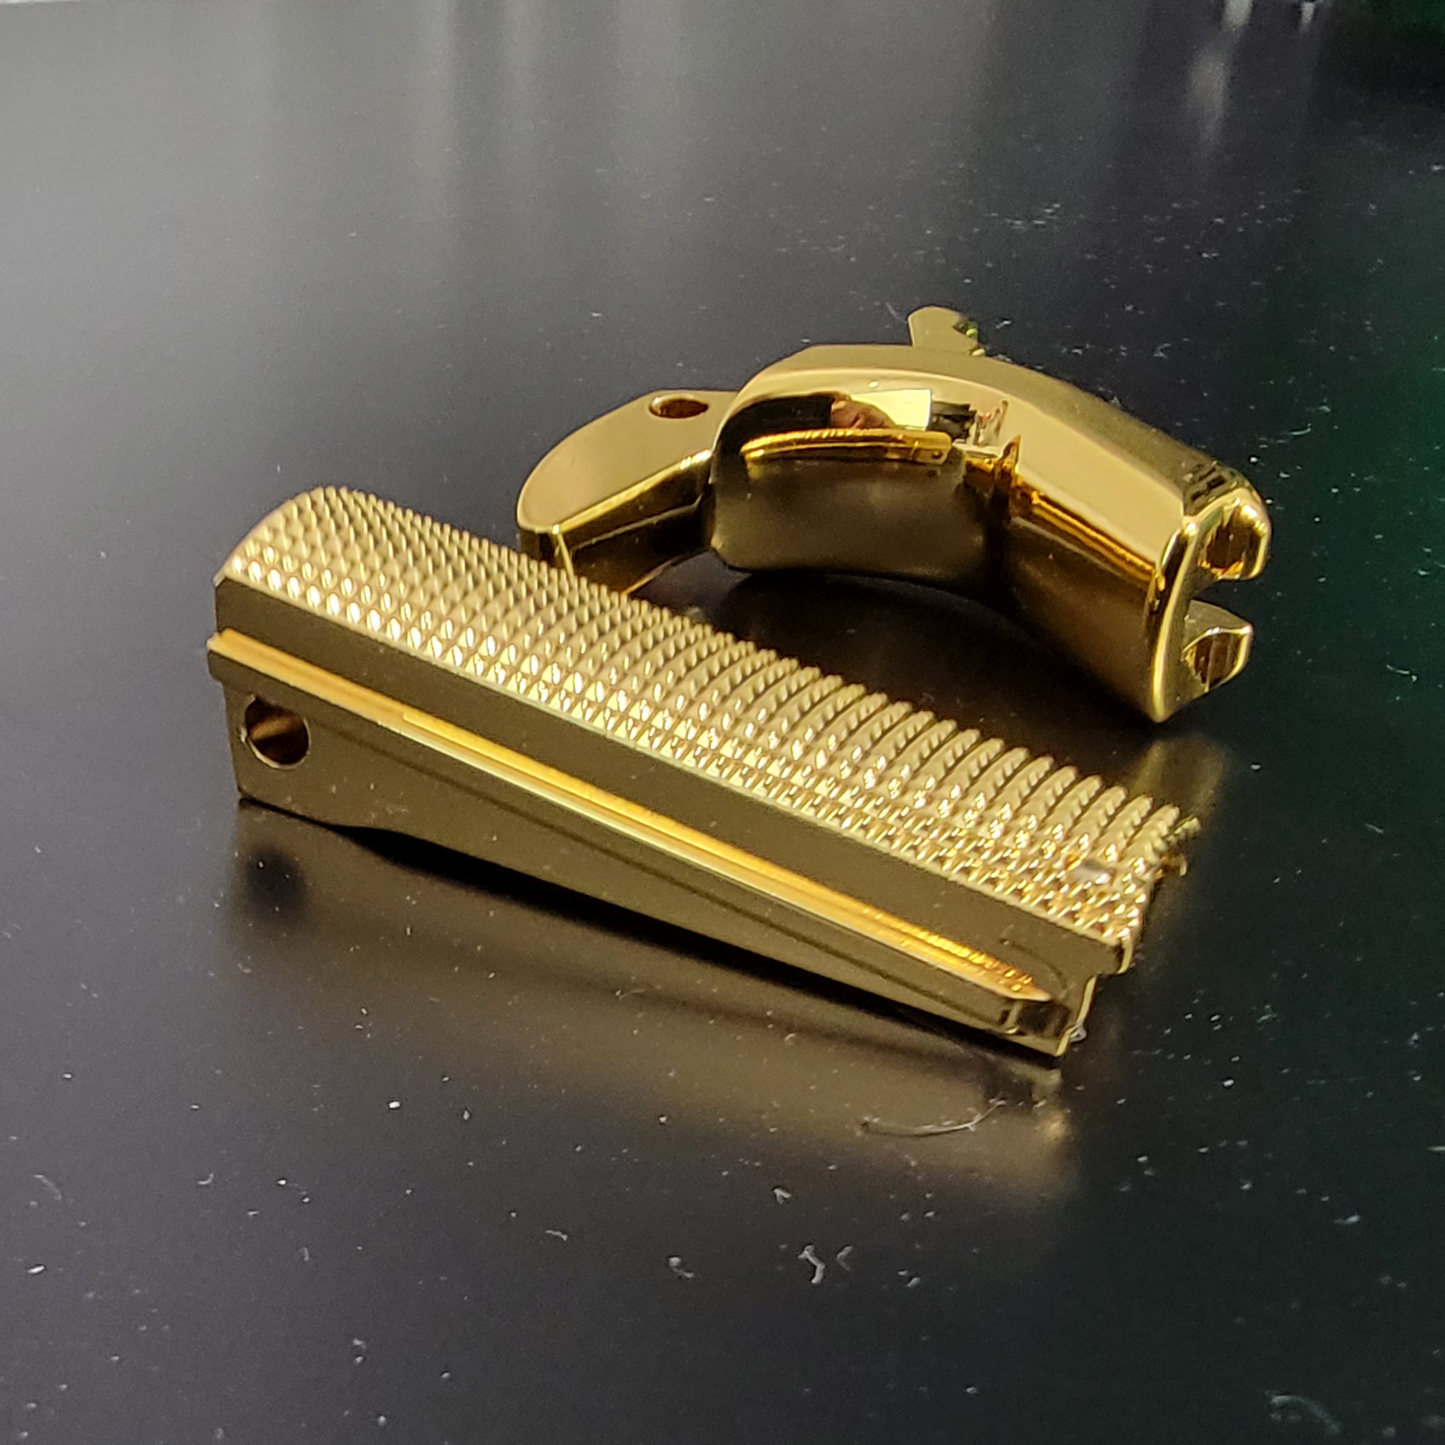 Free Screws Included 1911 grip safety 1911 Mainspring housing Kit full size .25 Radius Polished Real 24K Gold